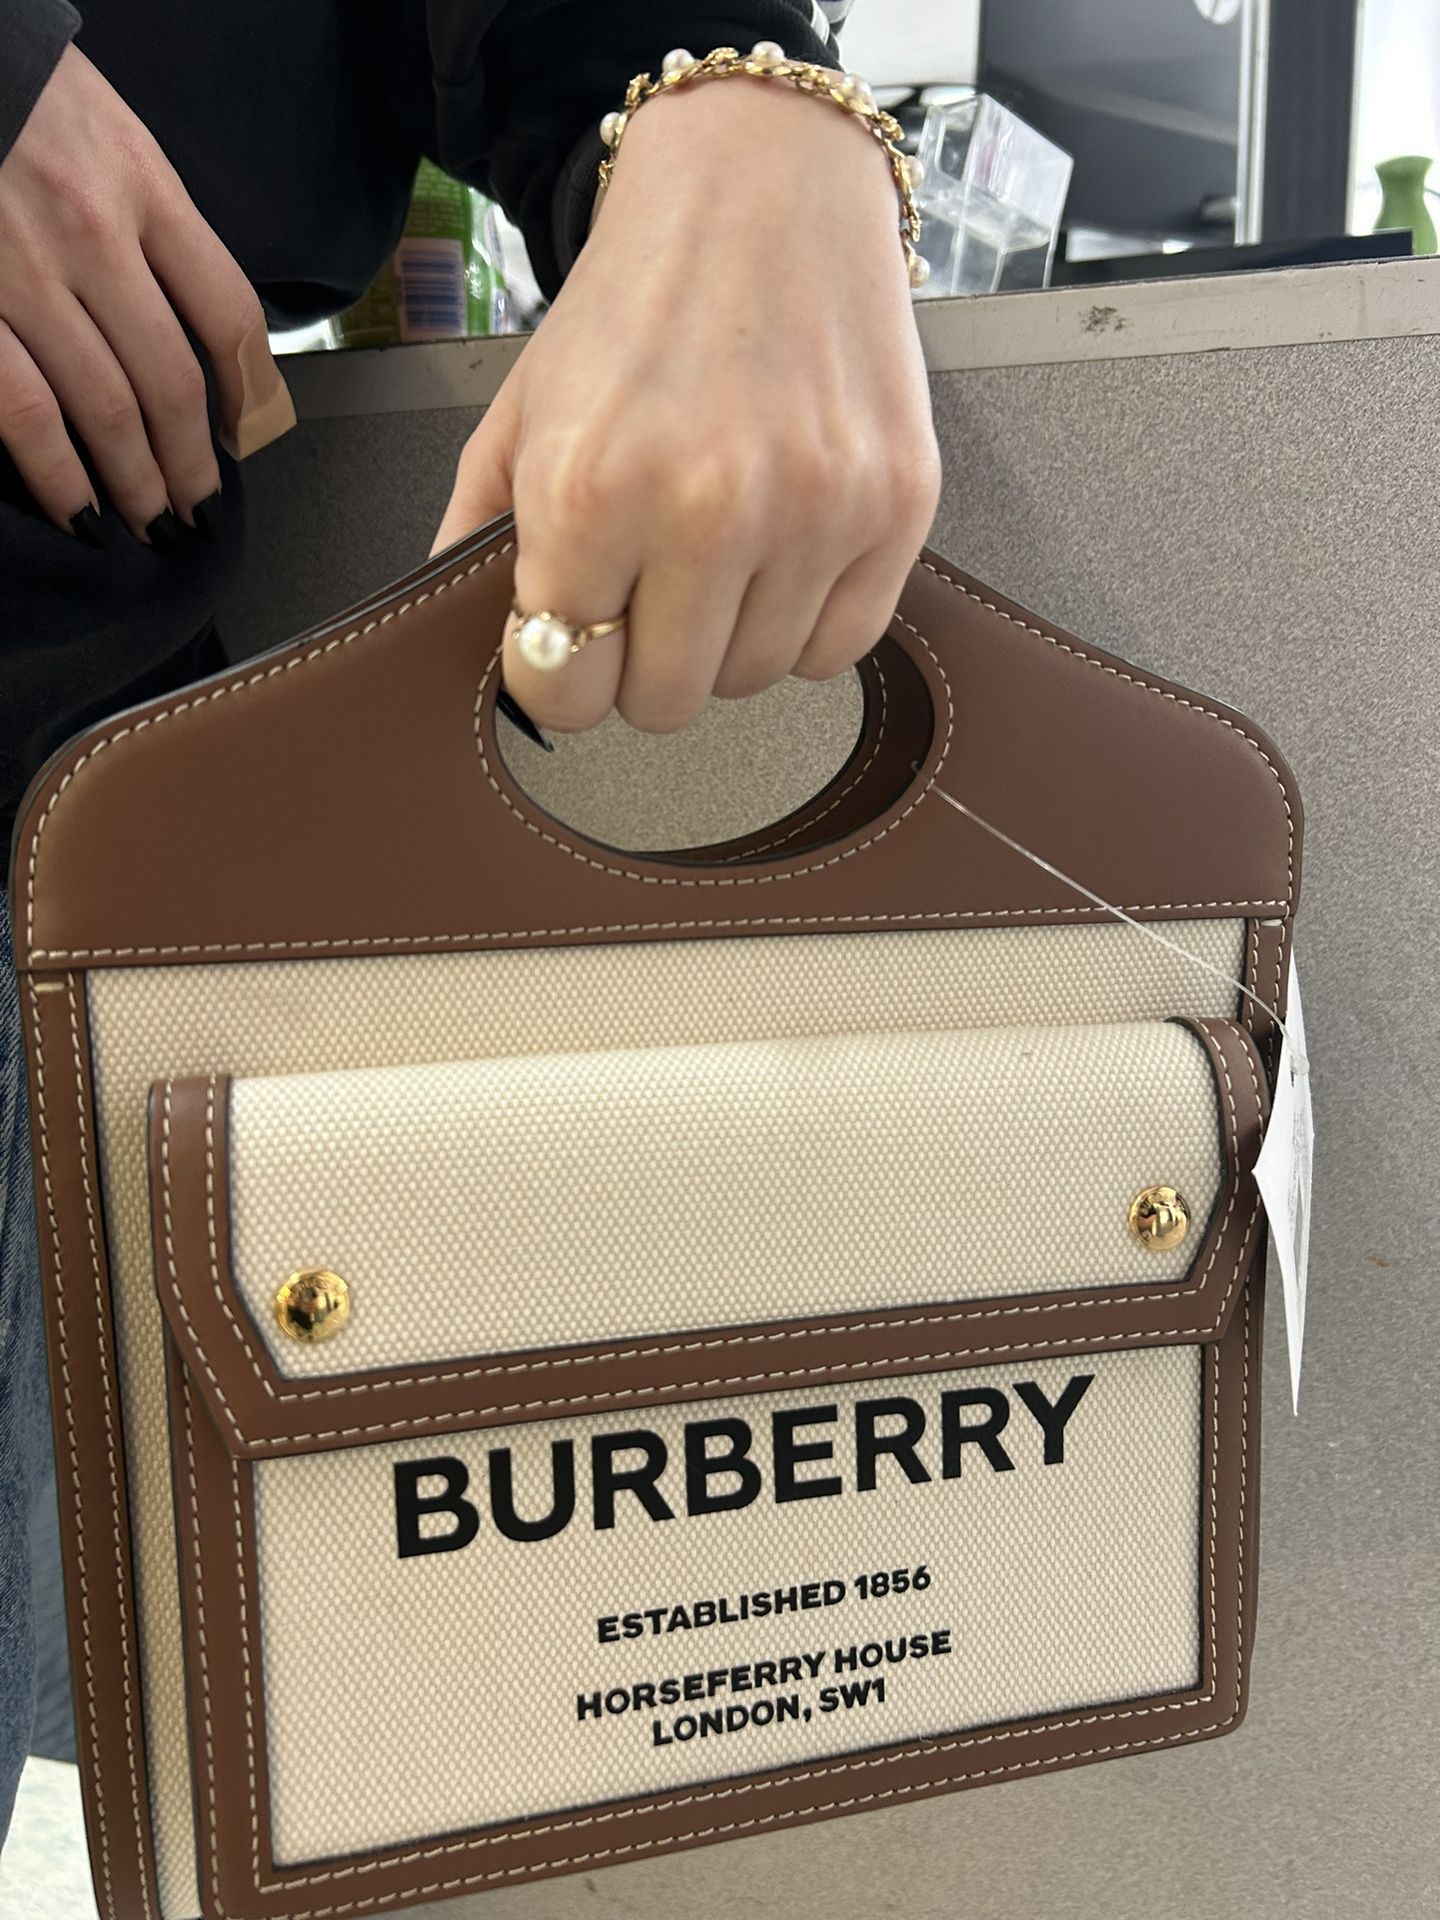 Burberry Purse and Pearls